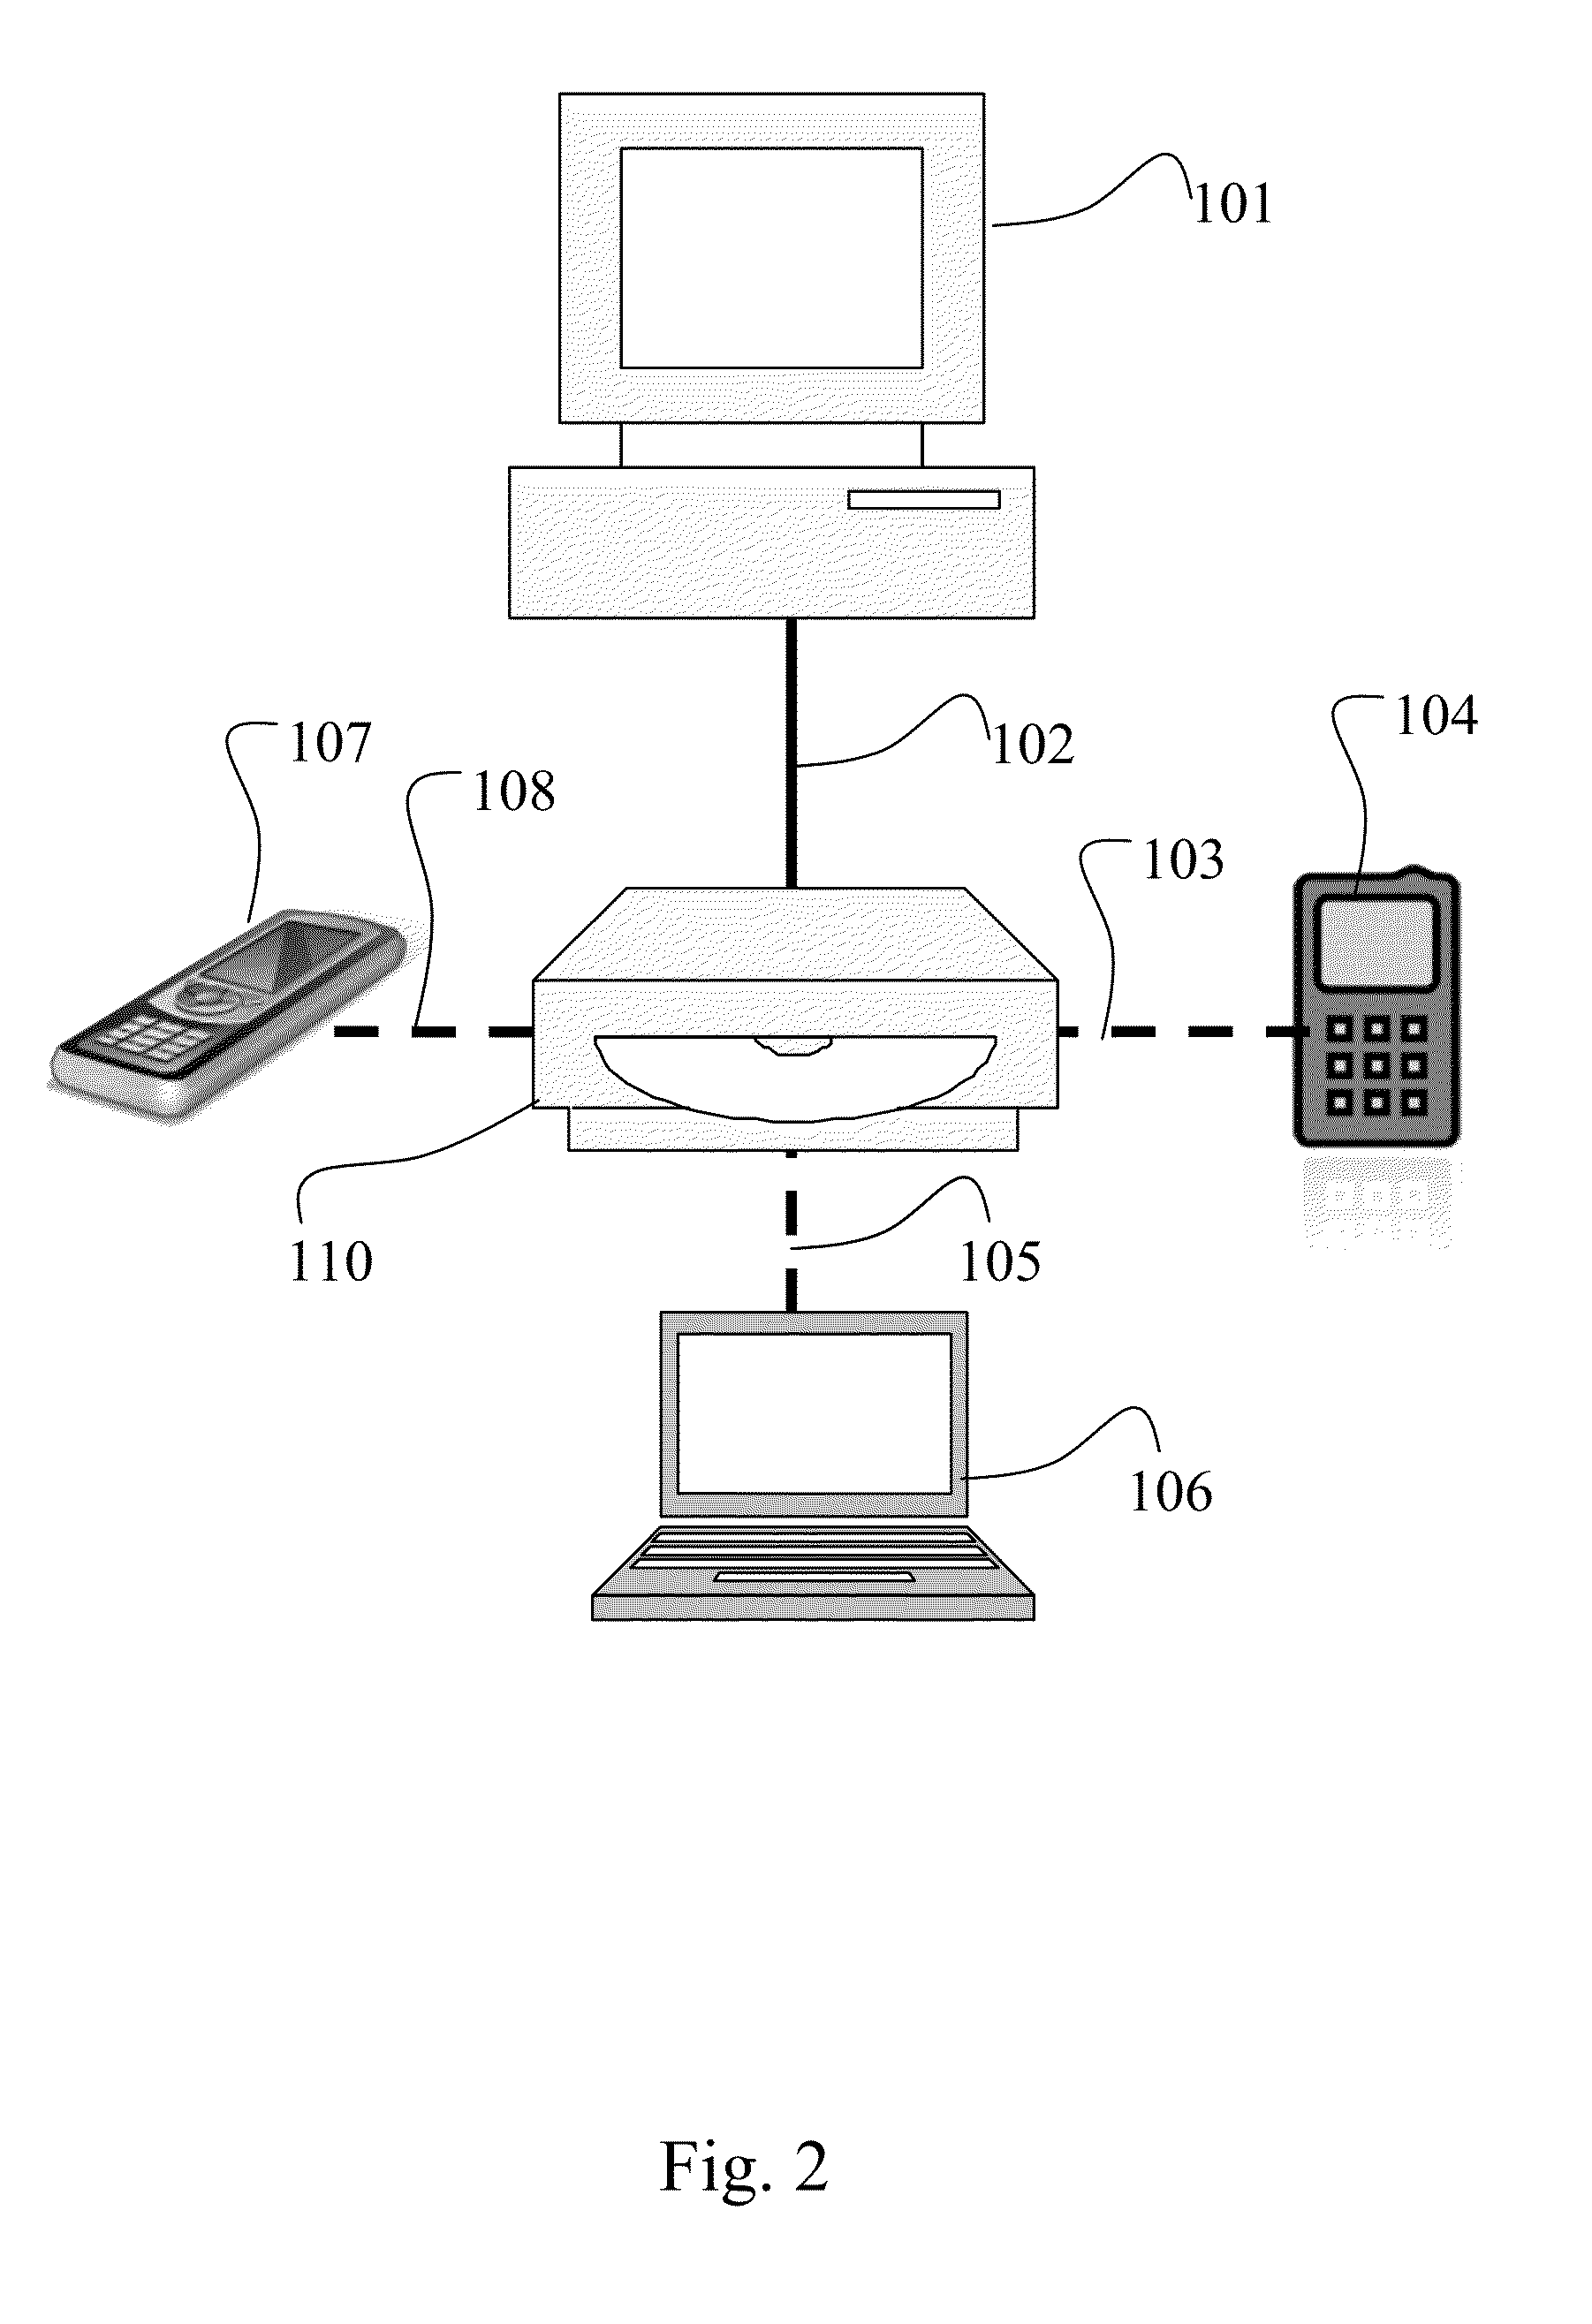 System and method for targeted location-based advertising